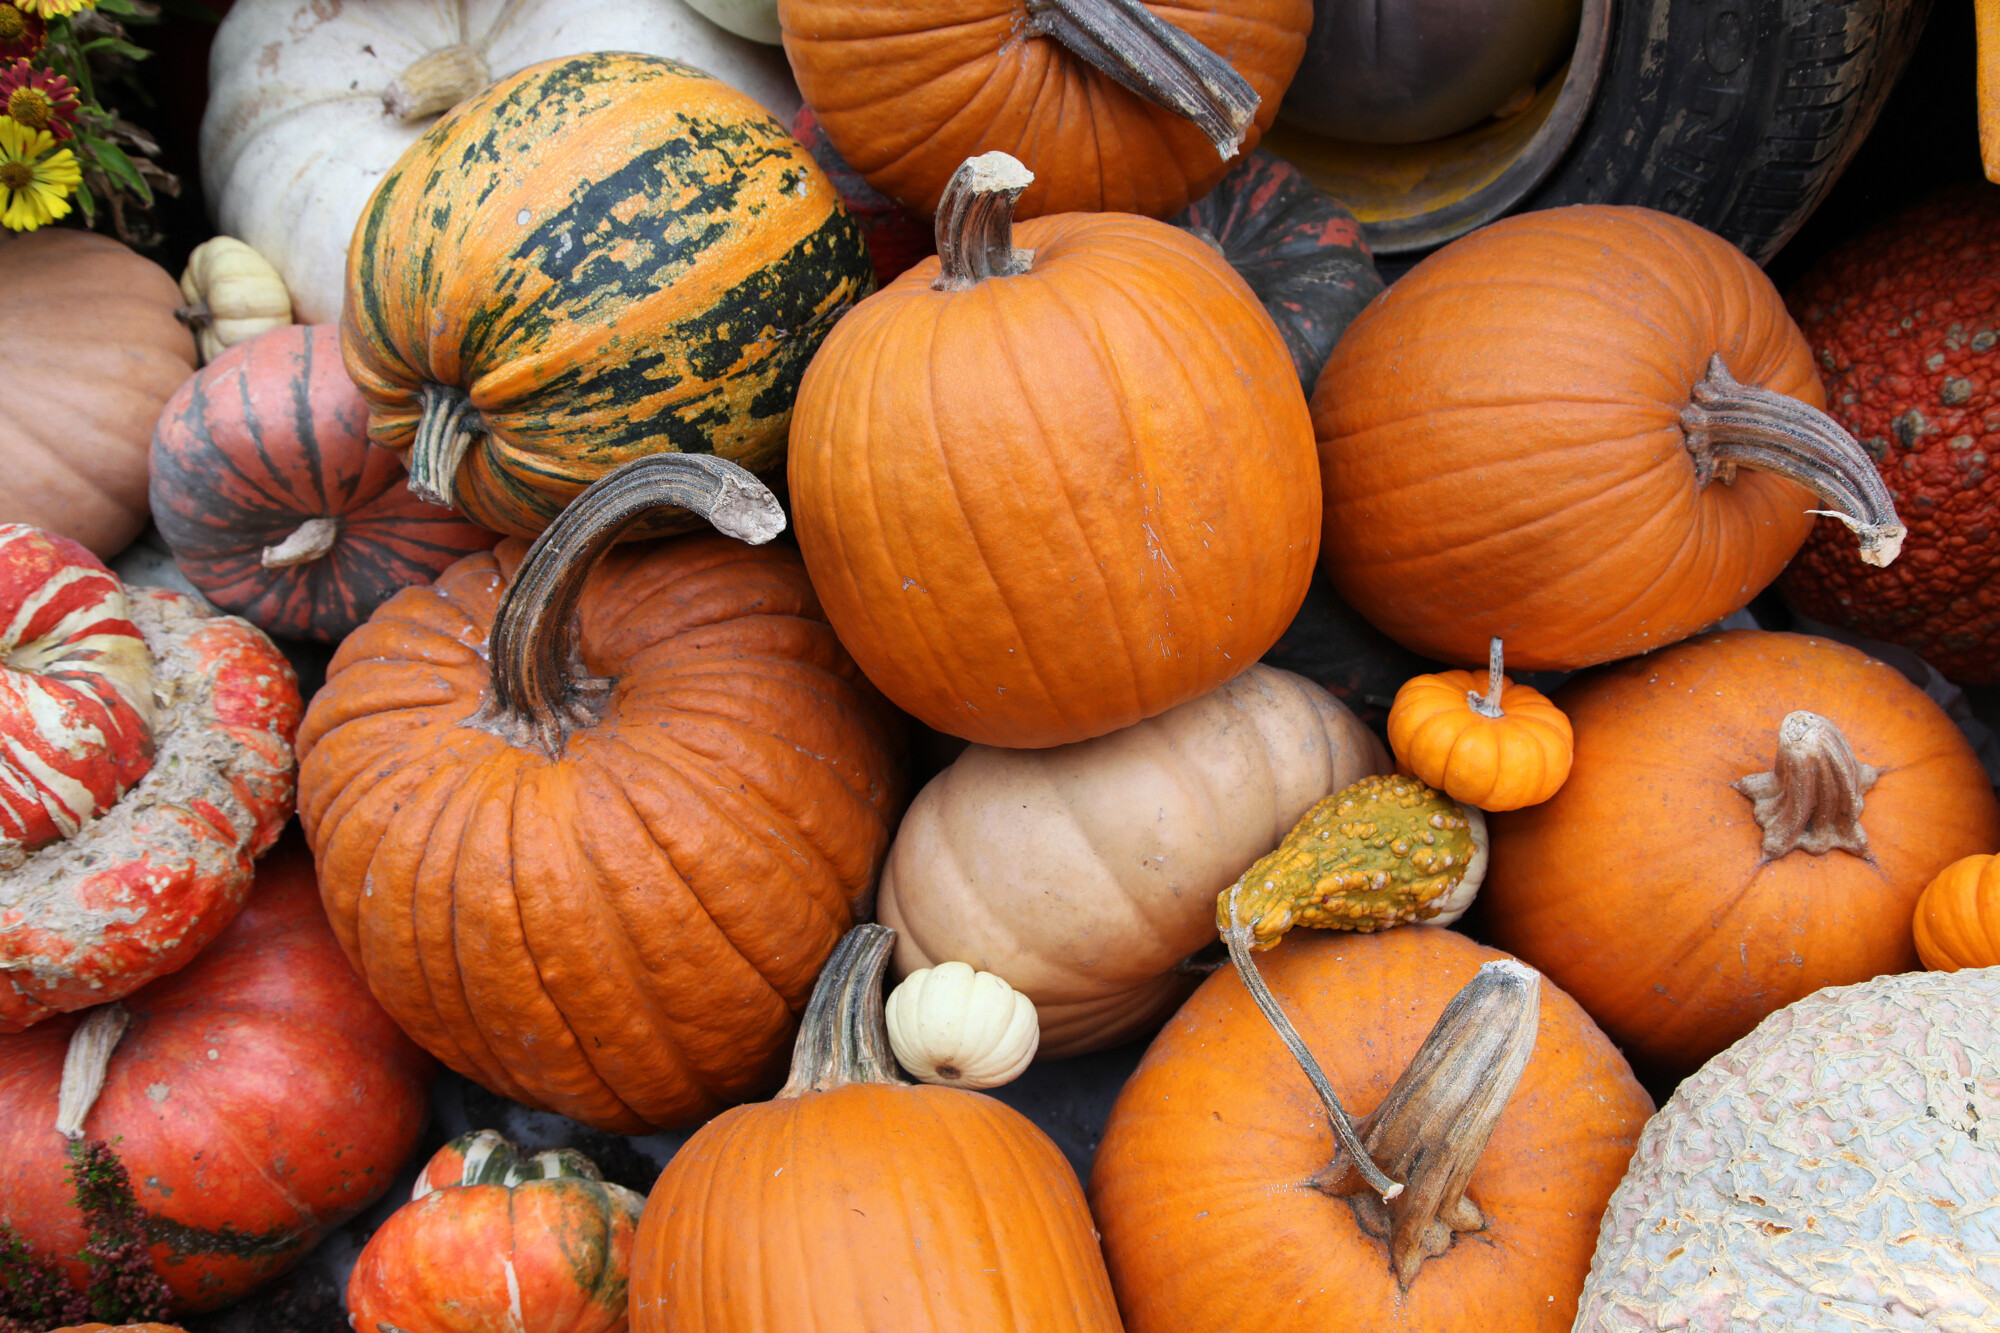 Are pumpkins for more than just Halloween?